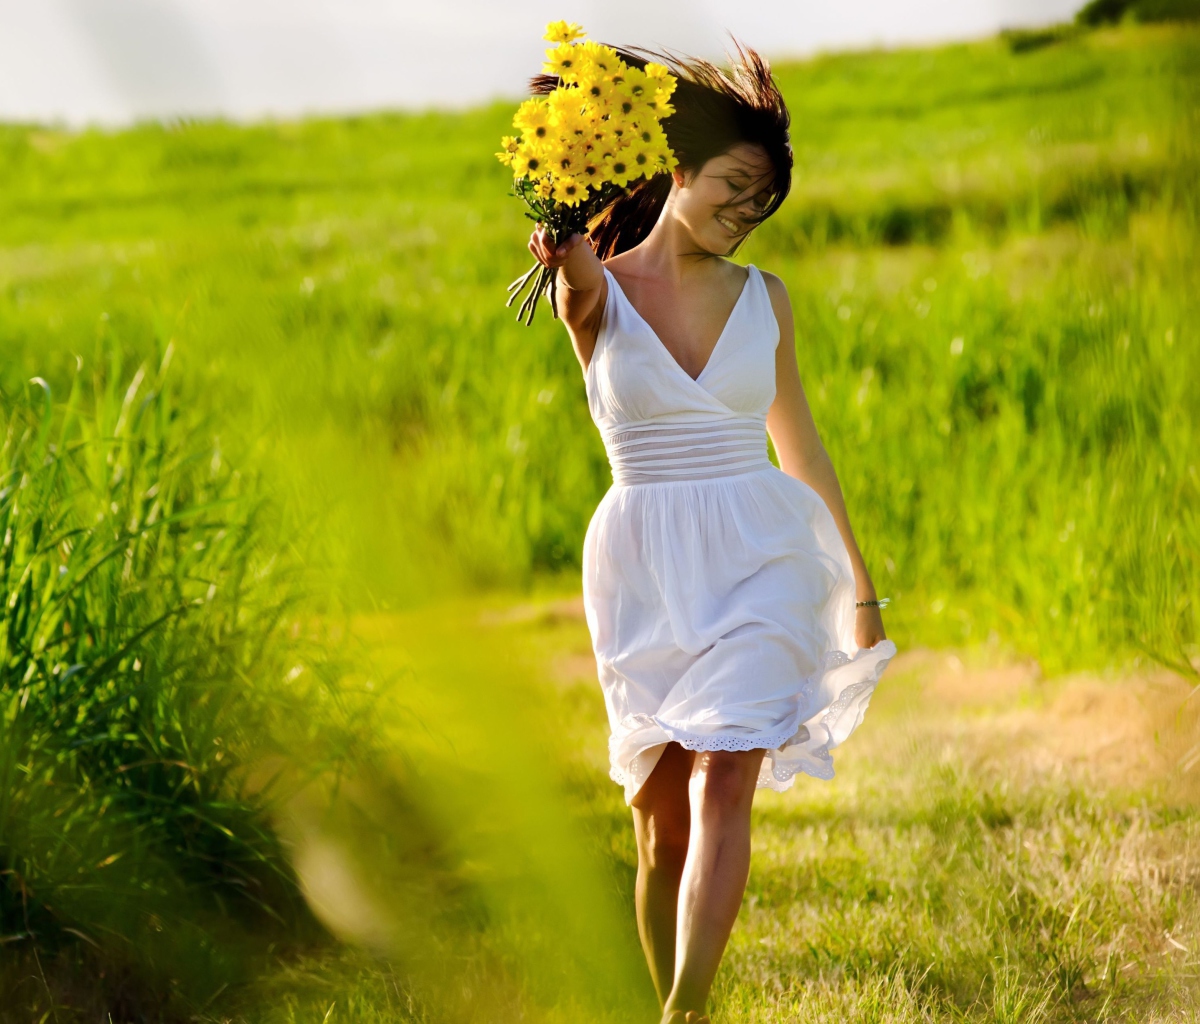 Girl With Yellow Flowers In Field wallpaper 1200x1024